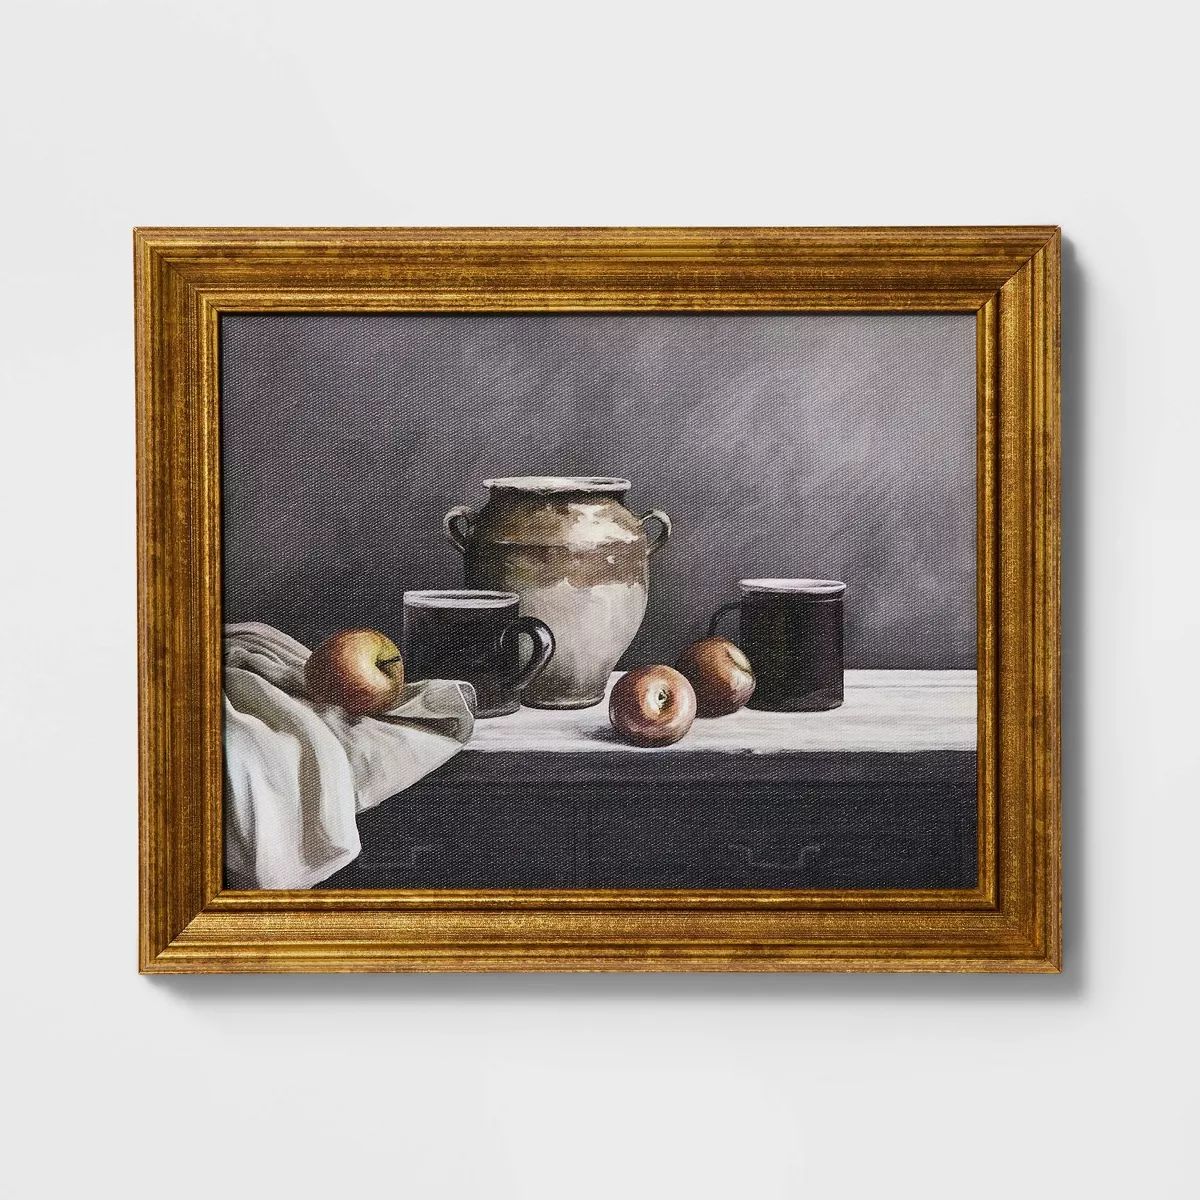 12" x 10" Moody Still Life Framed Wall Art Canvas - Threshold™ designed with Studio McGee | Target